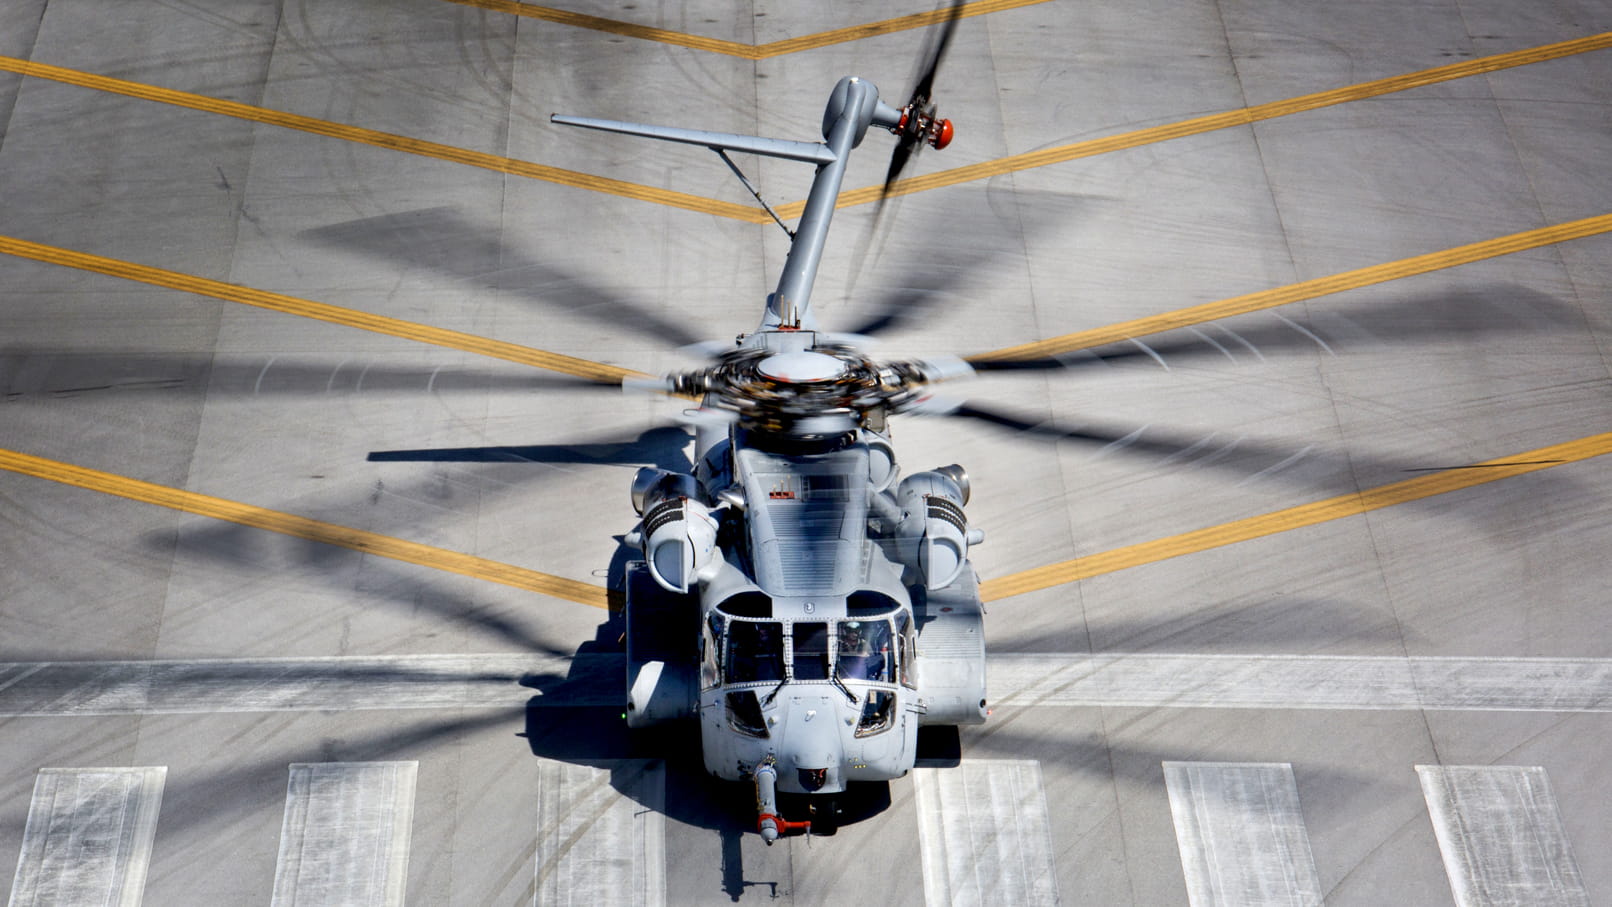 Navy helicopter